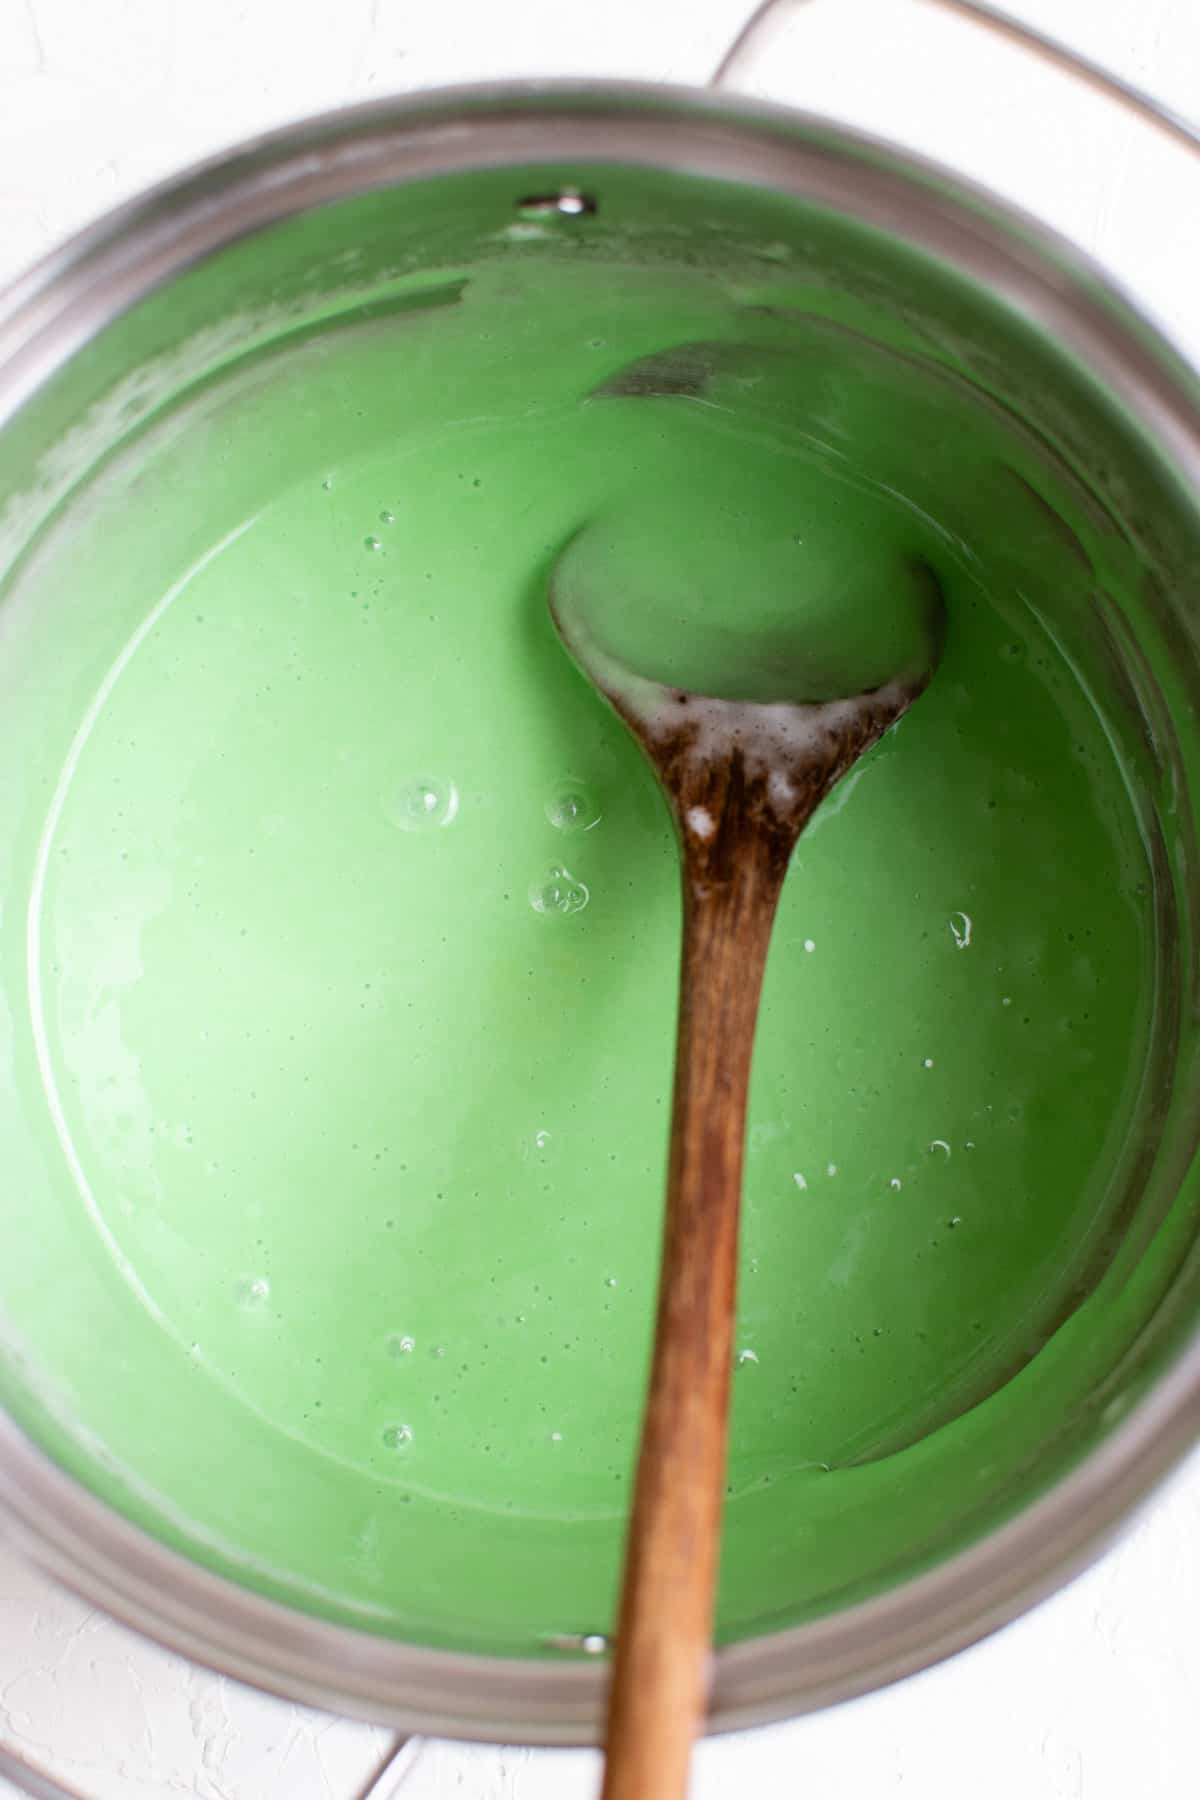 the marshmallow mixture in a pot has been dyed green